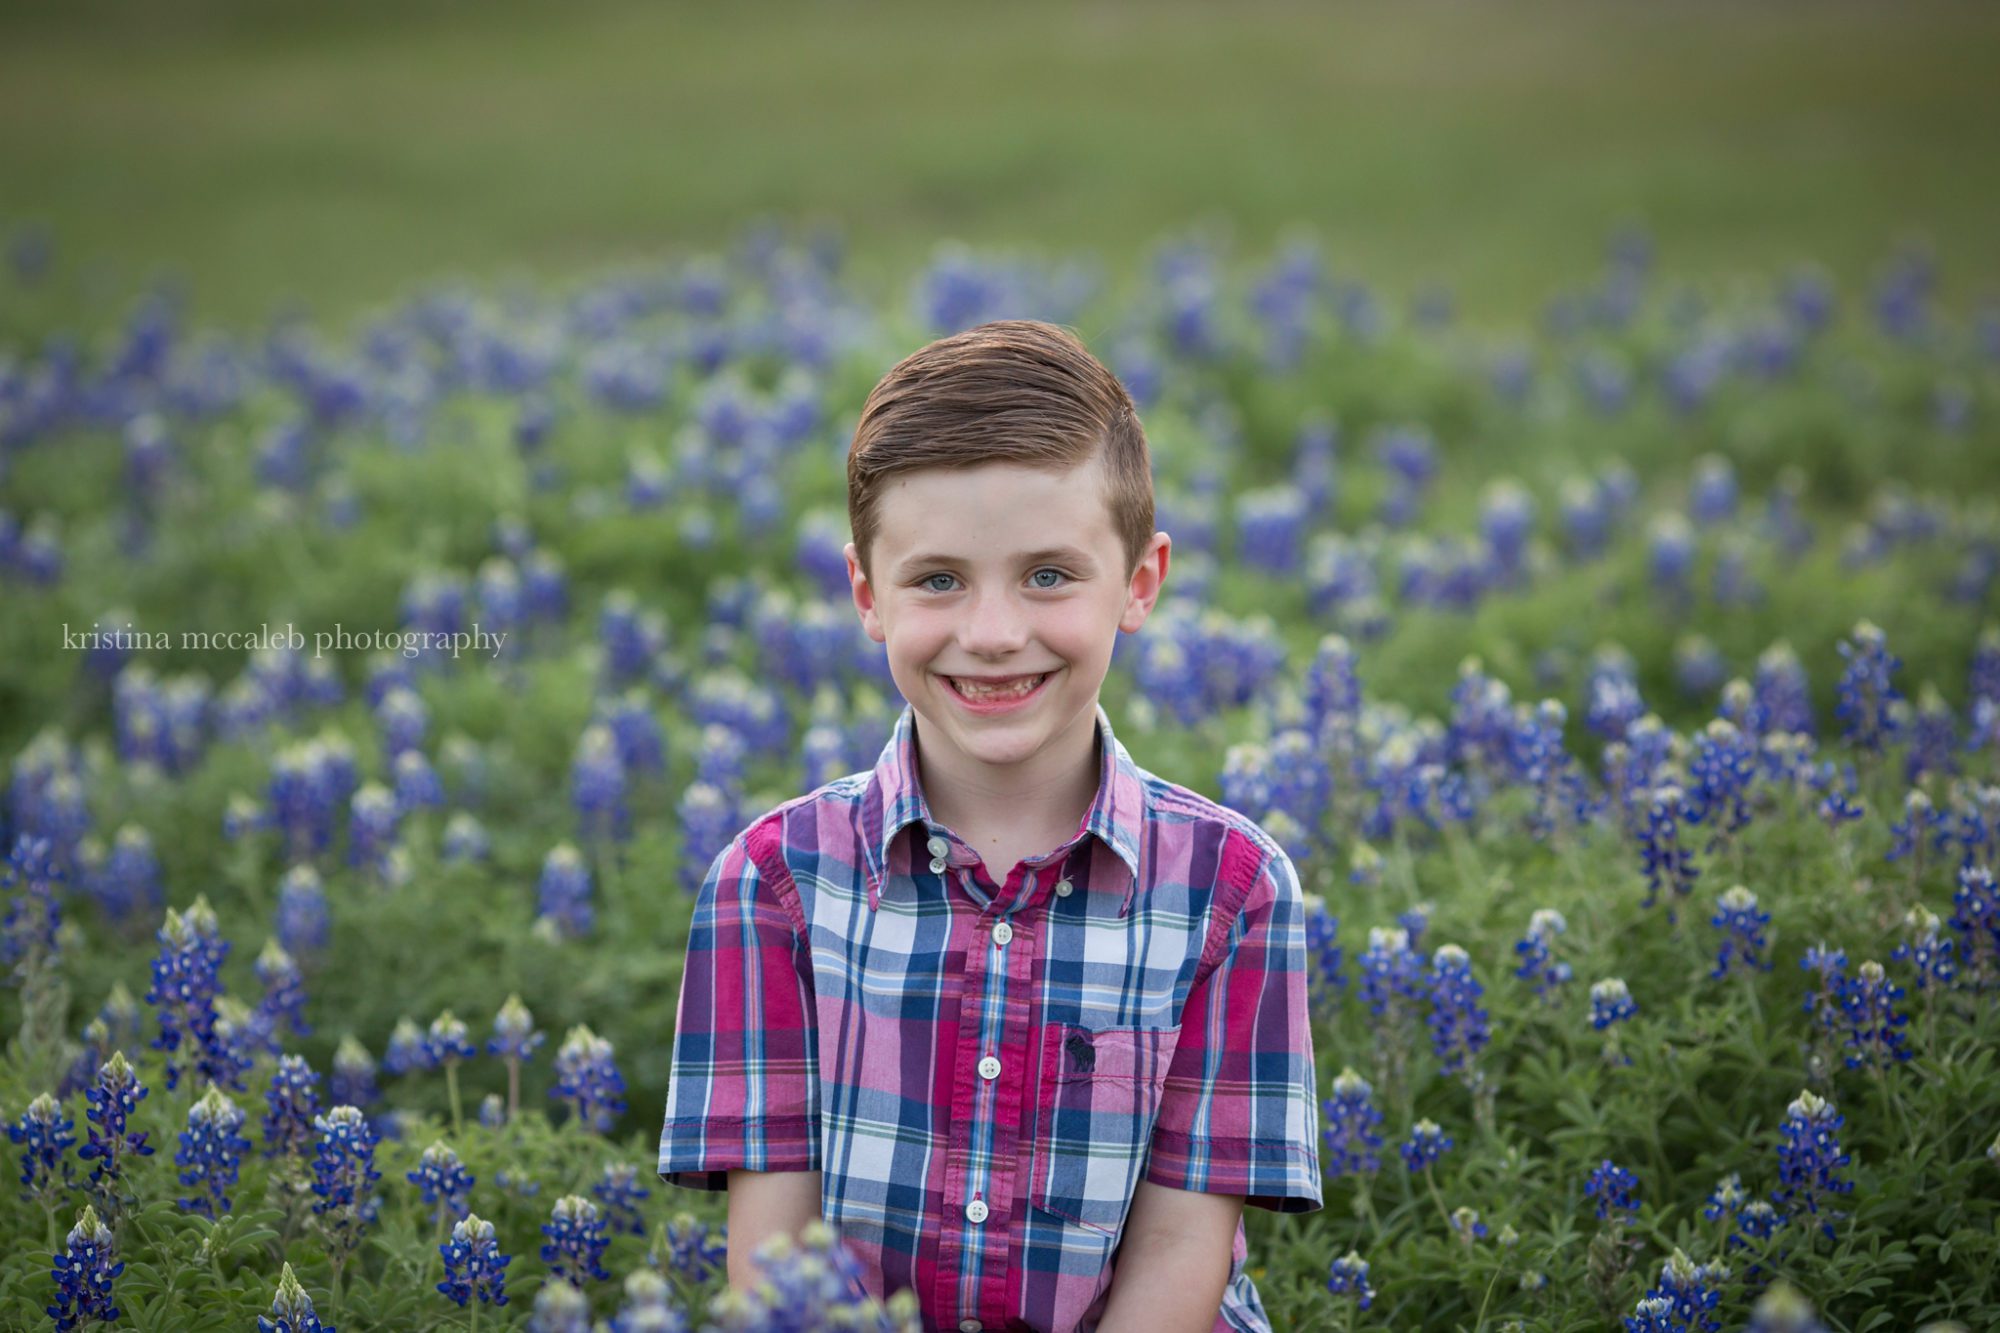 Spring in Texas means Bluebonnets